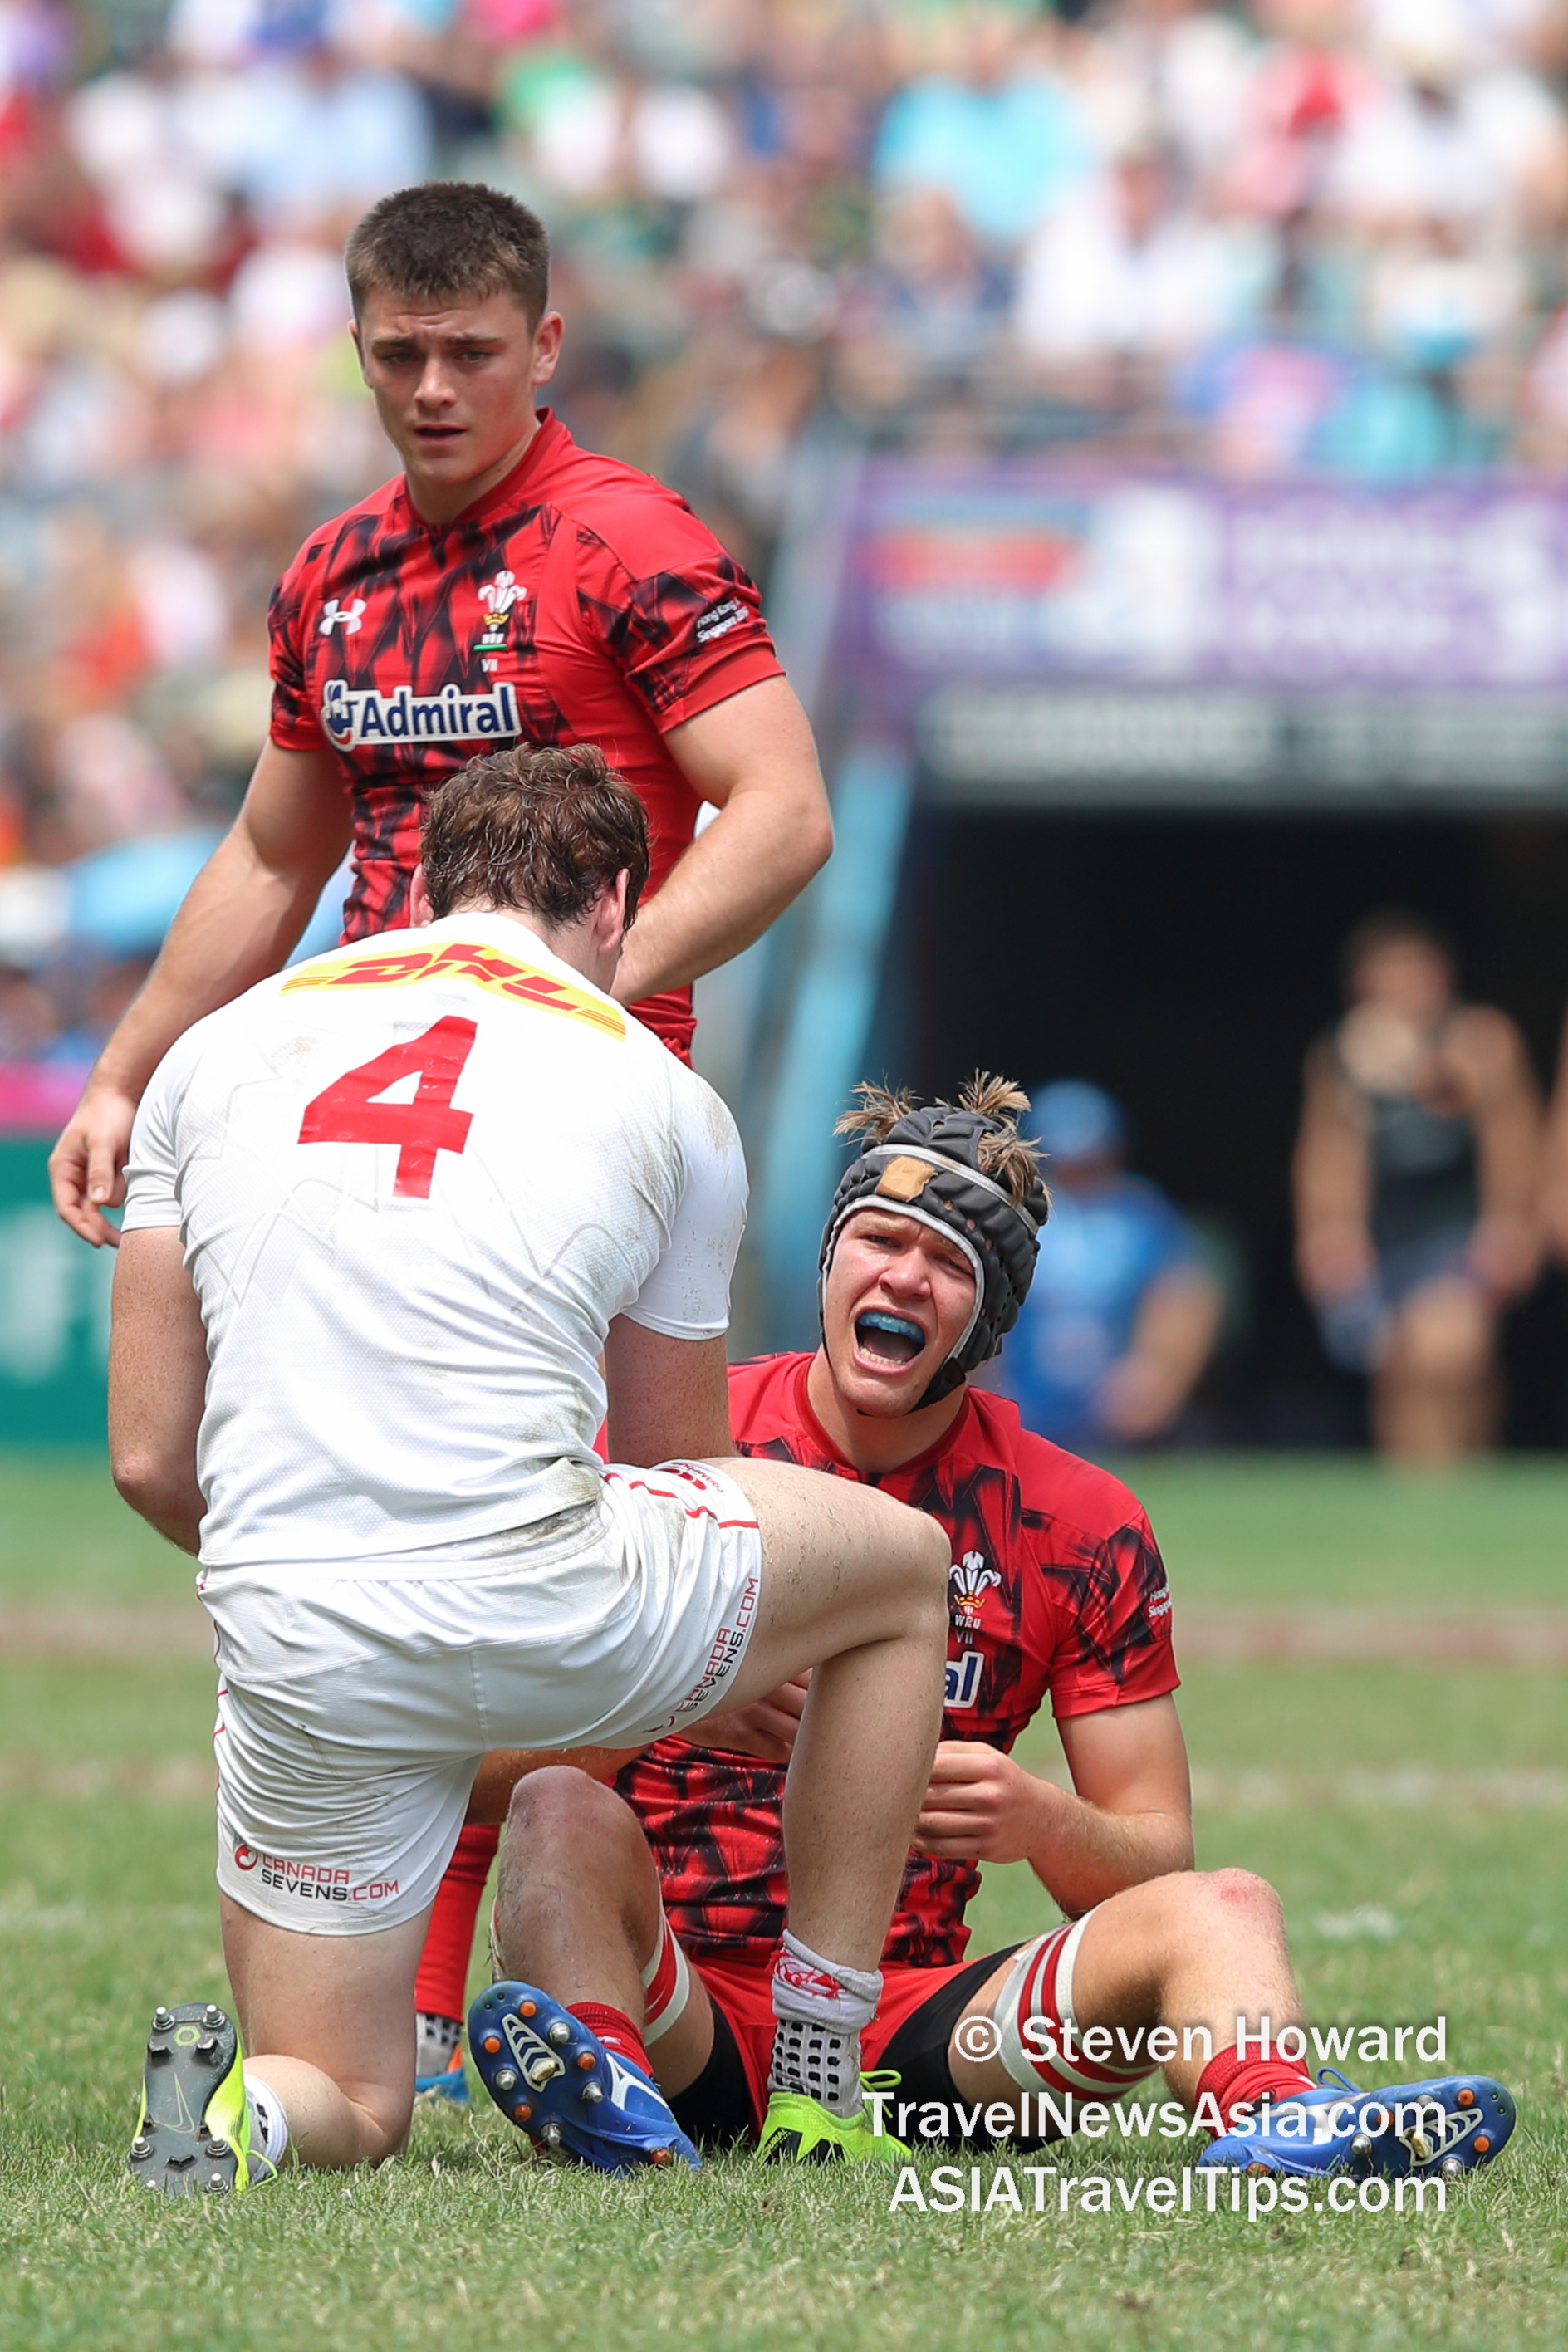 Wales in action vs USA during the Cathay Pacific / HSBC Hong Kong Sevens 2019. Wales beat Team USA 19-21. Picture by Steven Howard of TravelNewsAsia.com Click to enlarge.